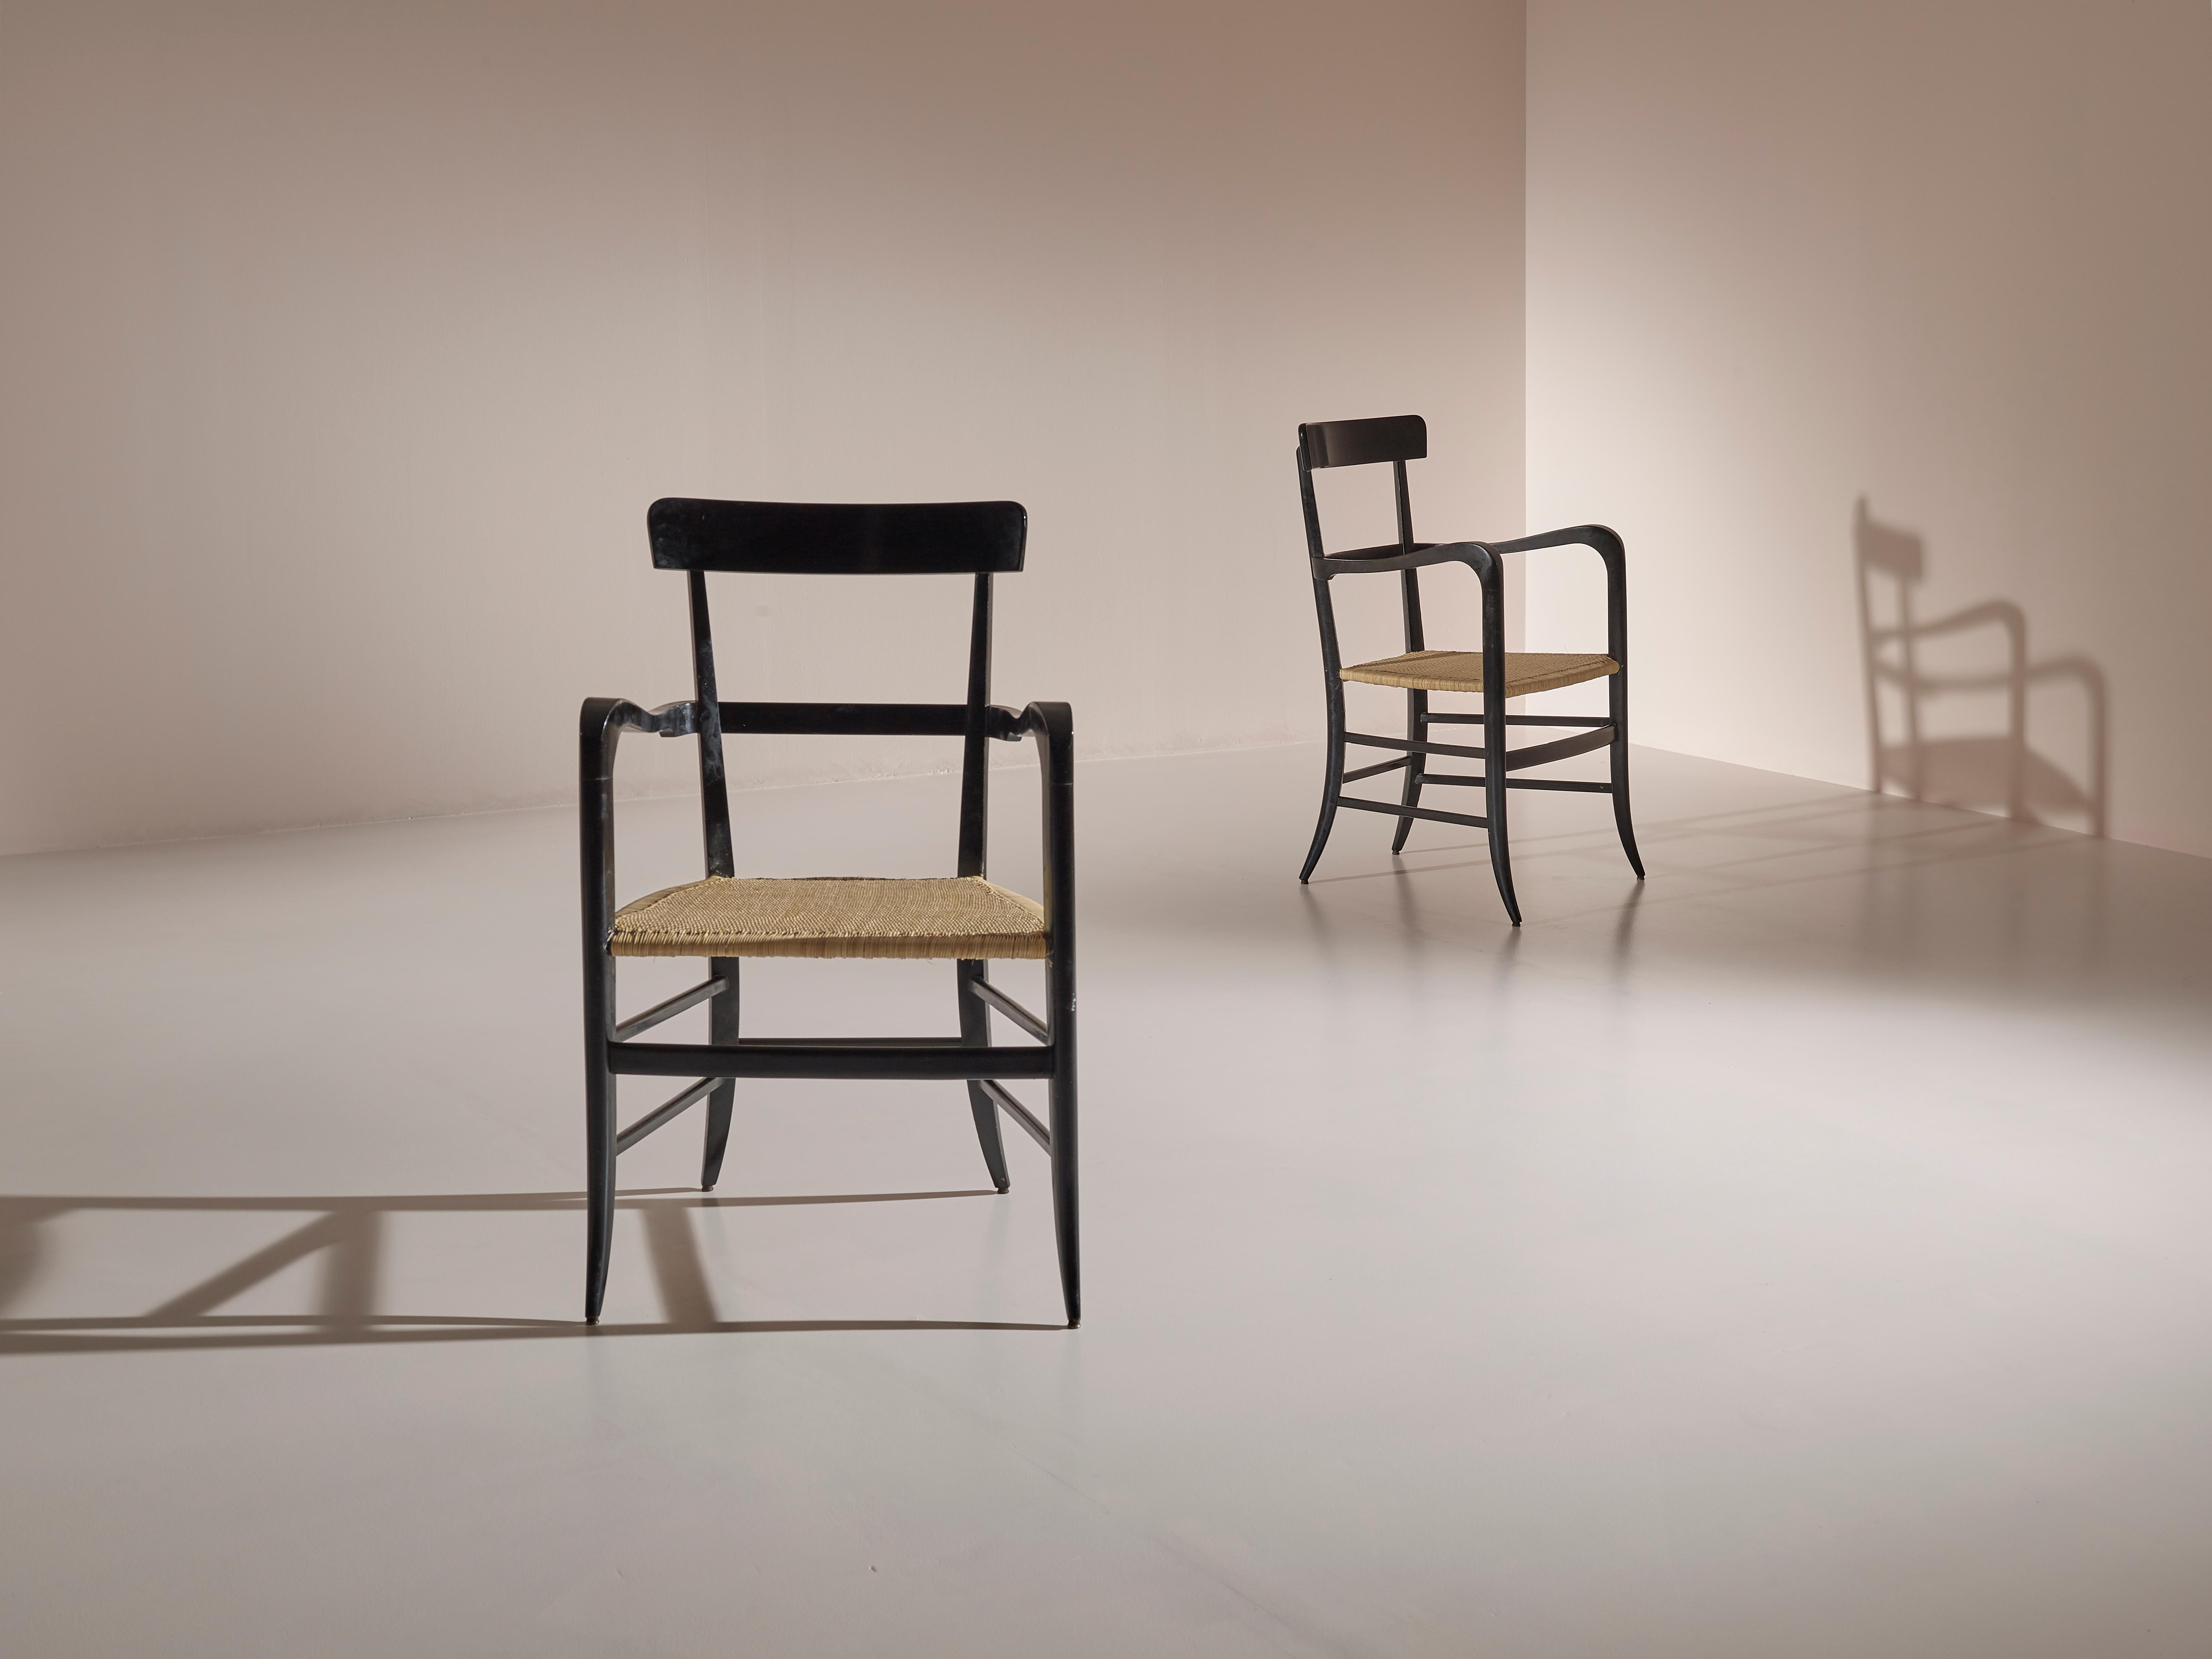 Rare and stylish pair of Chiavari armchairs produced by the renewed cabinetmaker Guido Chiappe in the early 1960s.
This model has been specifically designed for the hall of the Continental Hotel in Santa Margherita Ligure (Genoa) for a total